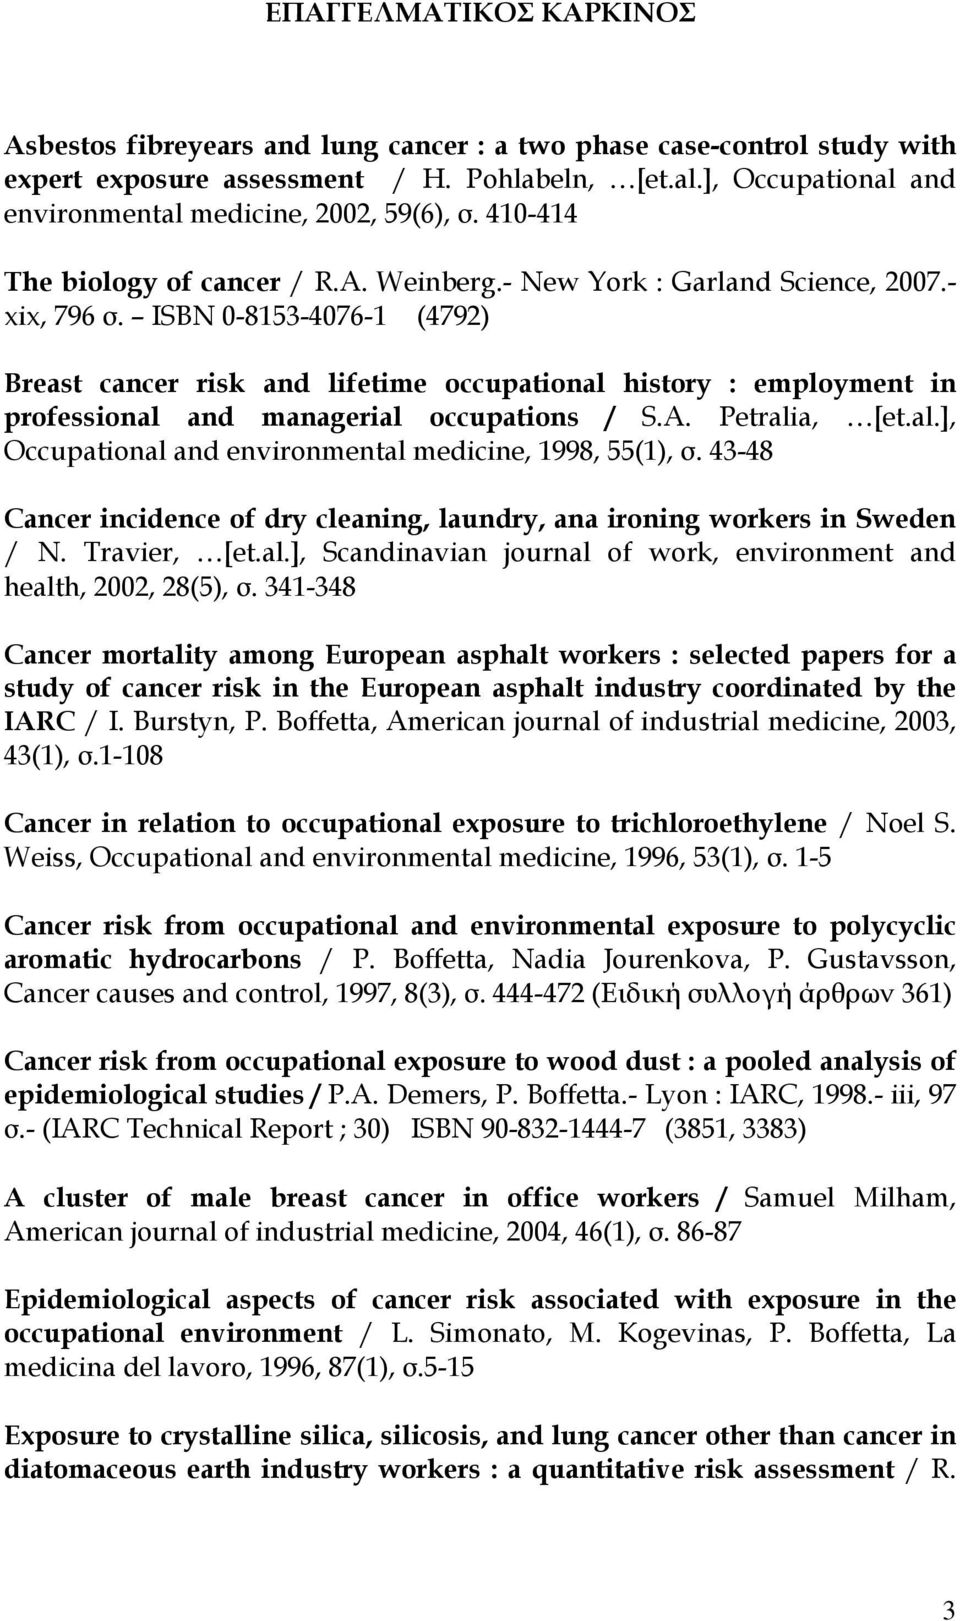 ISBN 0-8153-4076-1 (4792) Breast cancer risk and lifetime occupational history : employment in professional and managerial occupations / S.A. Petralia, [et.al.], Occupational and environmental medicine, 1998, 55(1), σ.